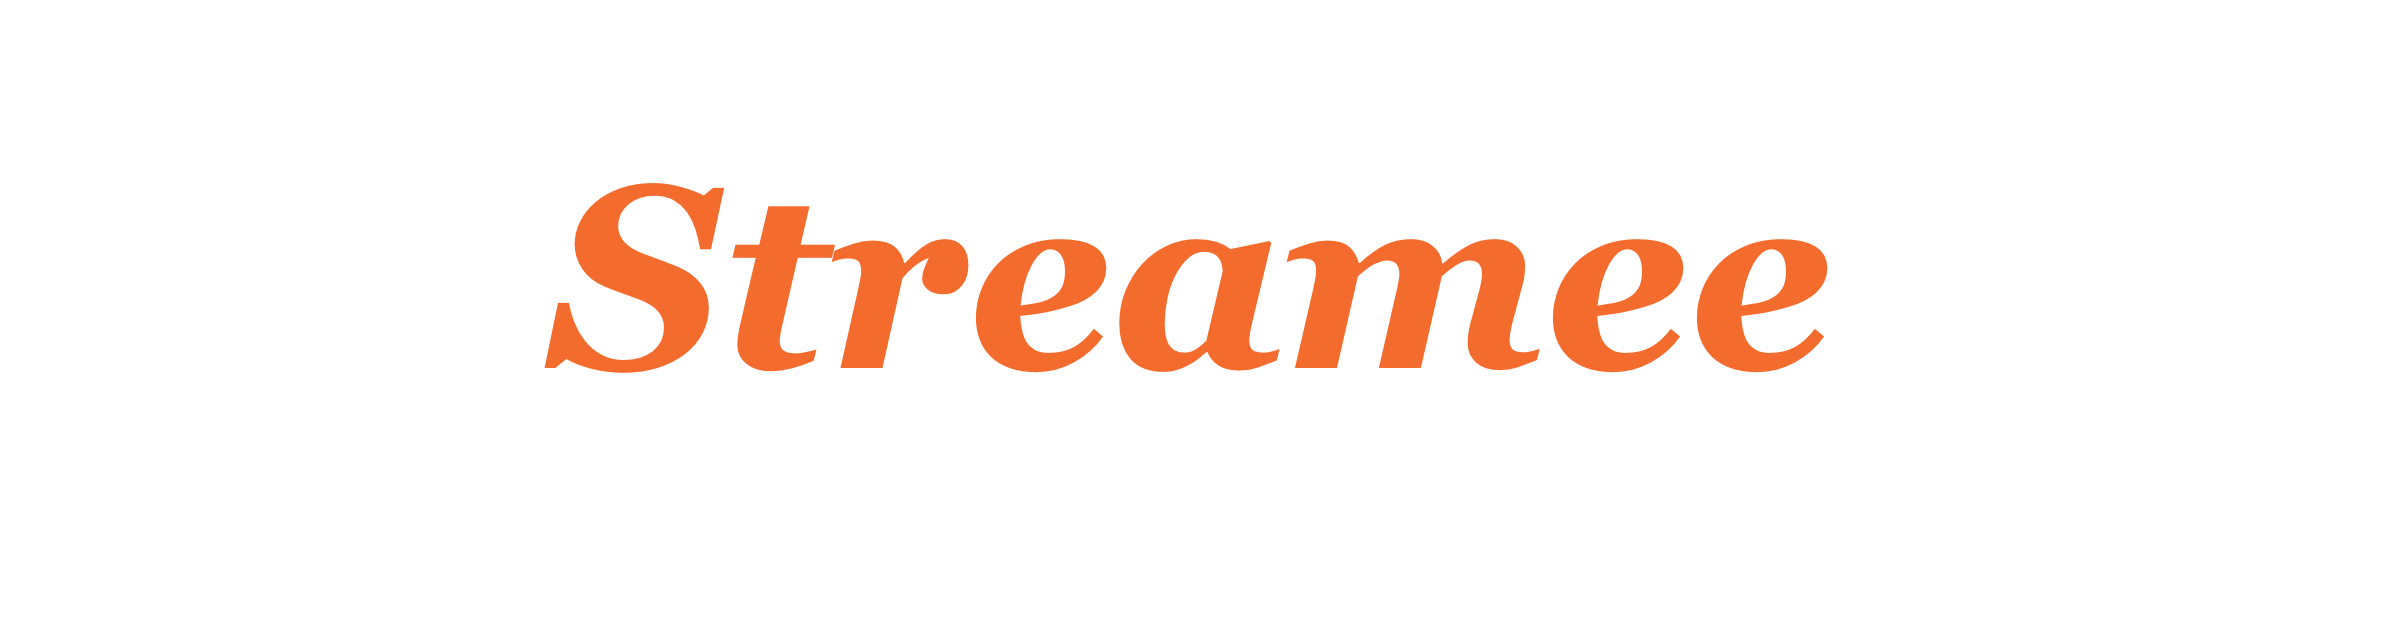 Streamee, a TV experiment